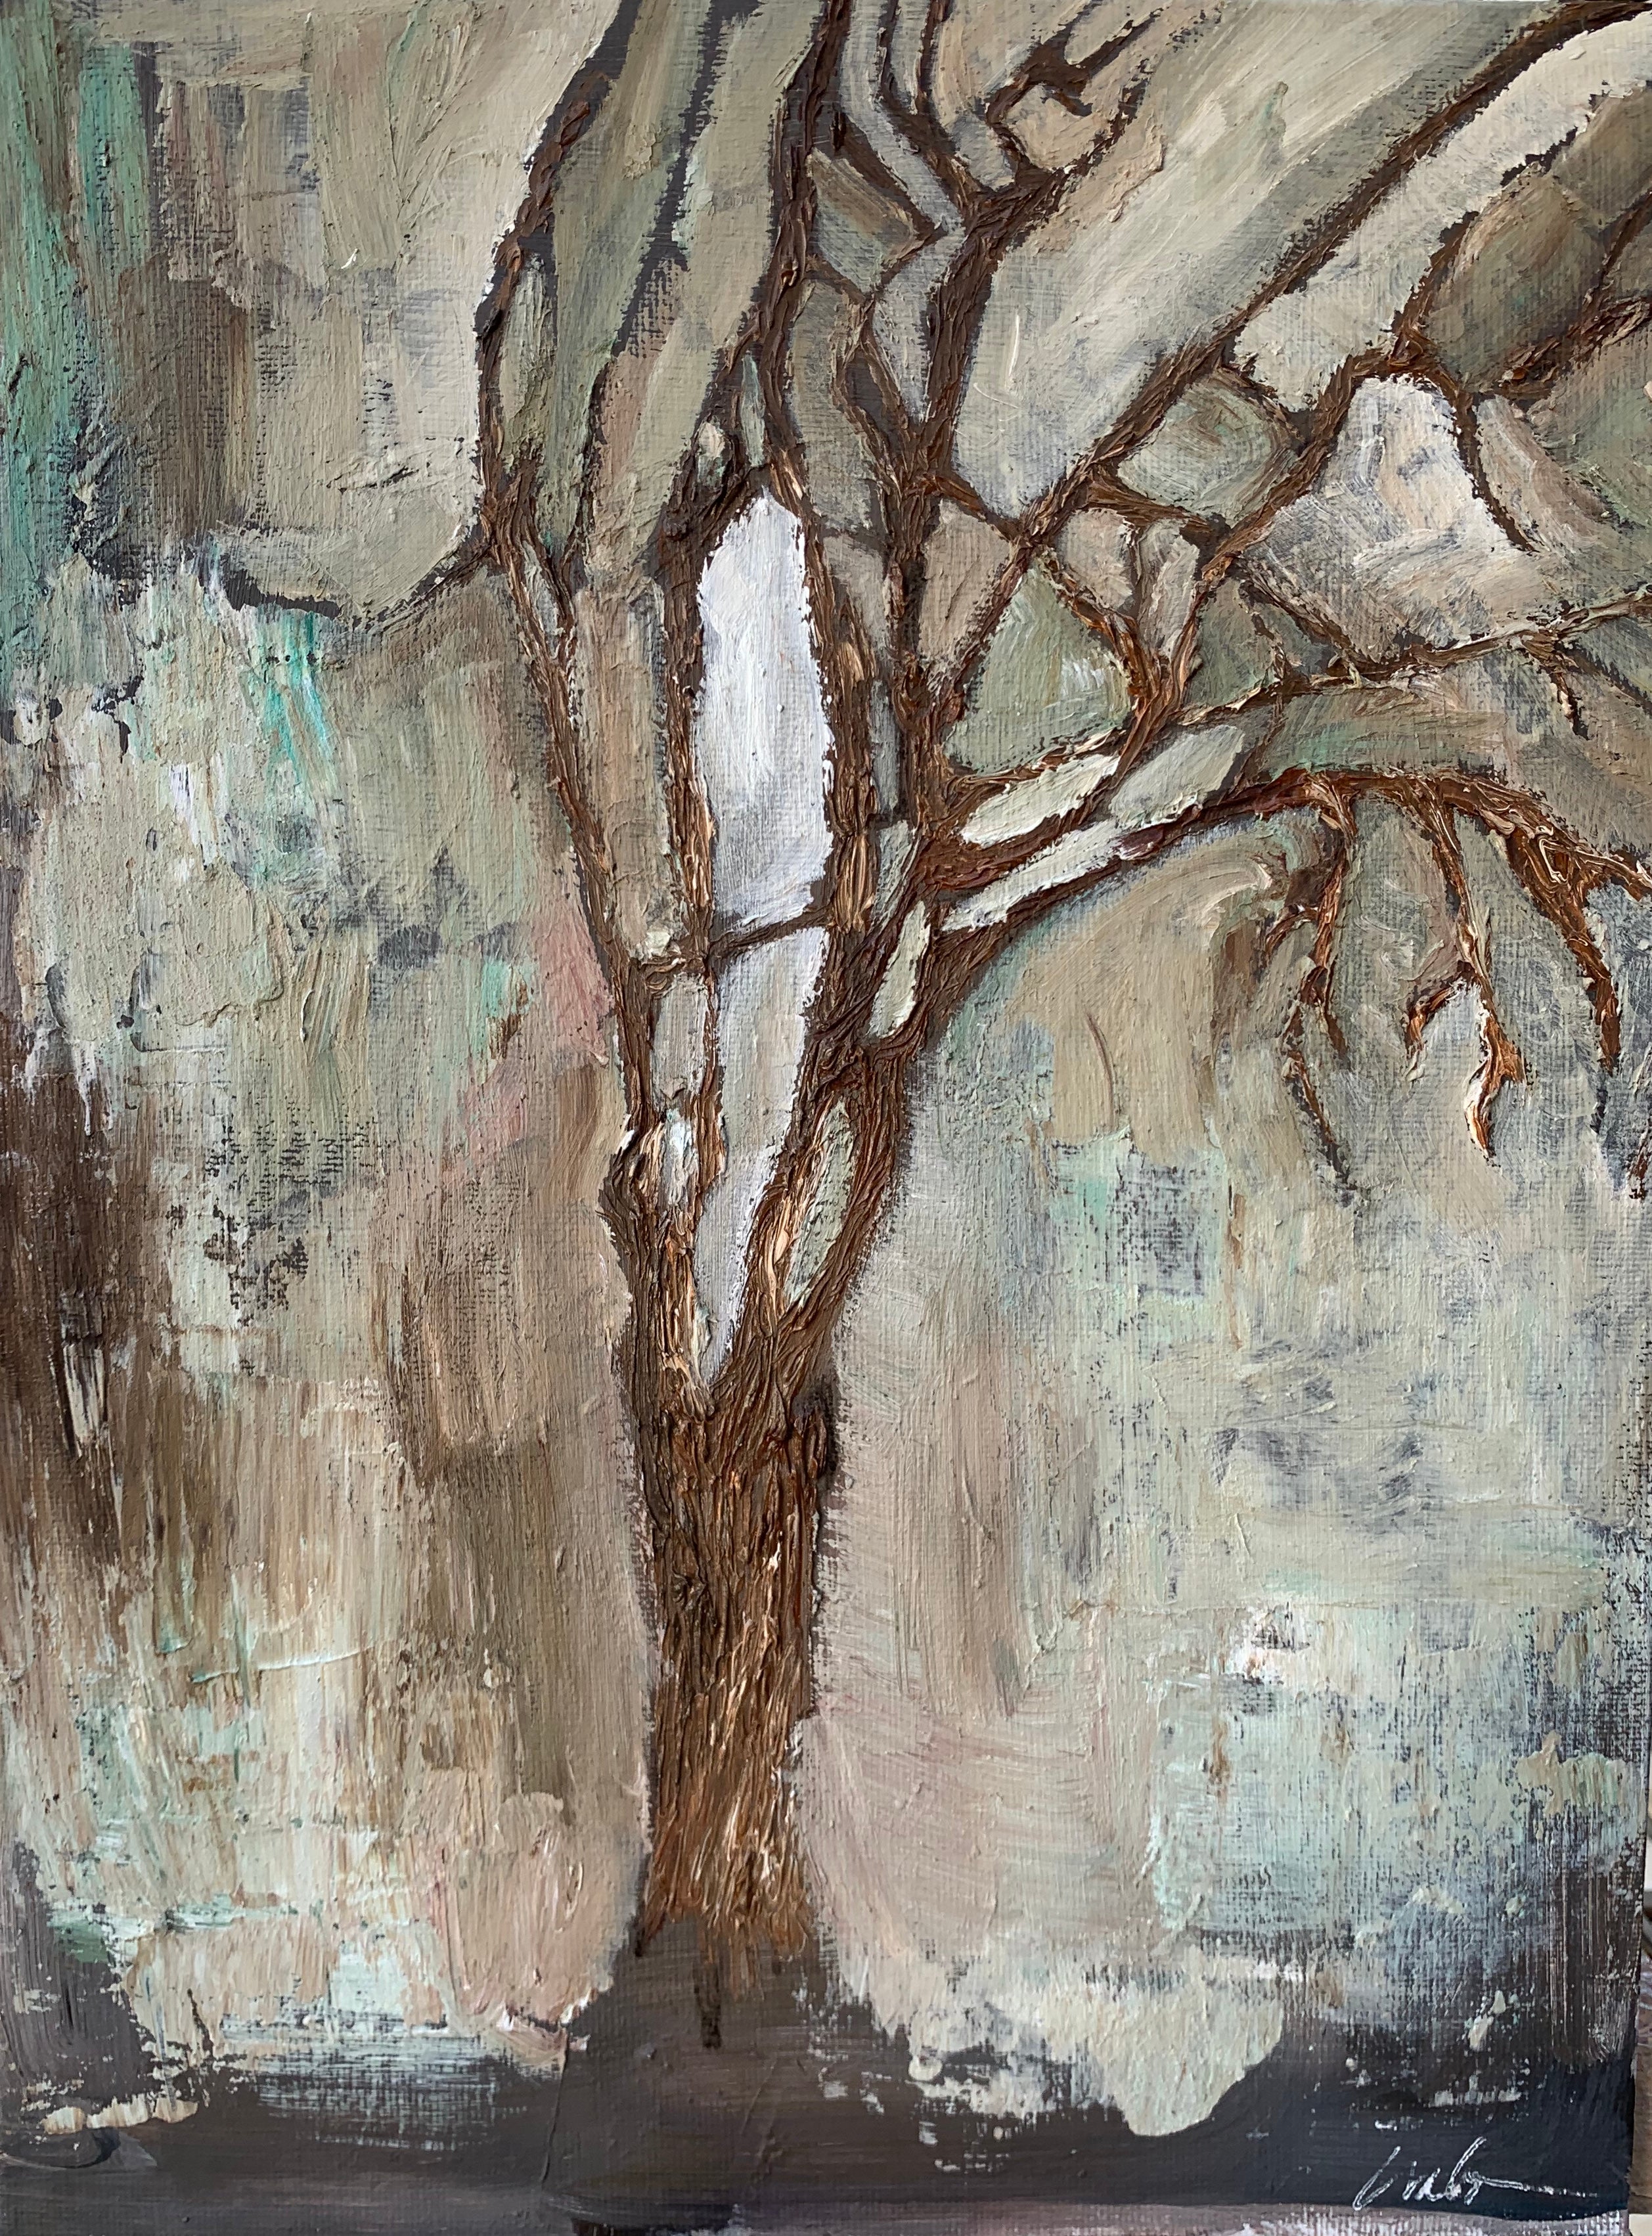 Highly textured and gleaming with subtle nuances of light and dark tones. Oak tree in Winter.